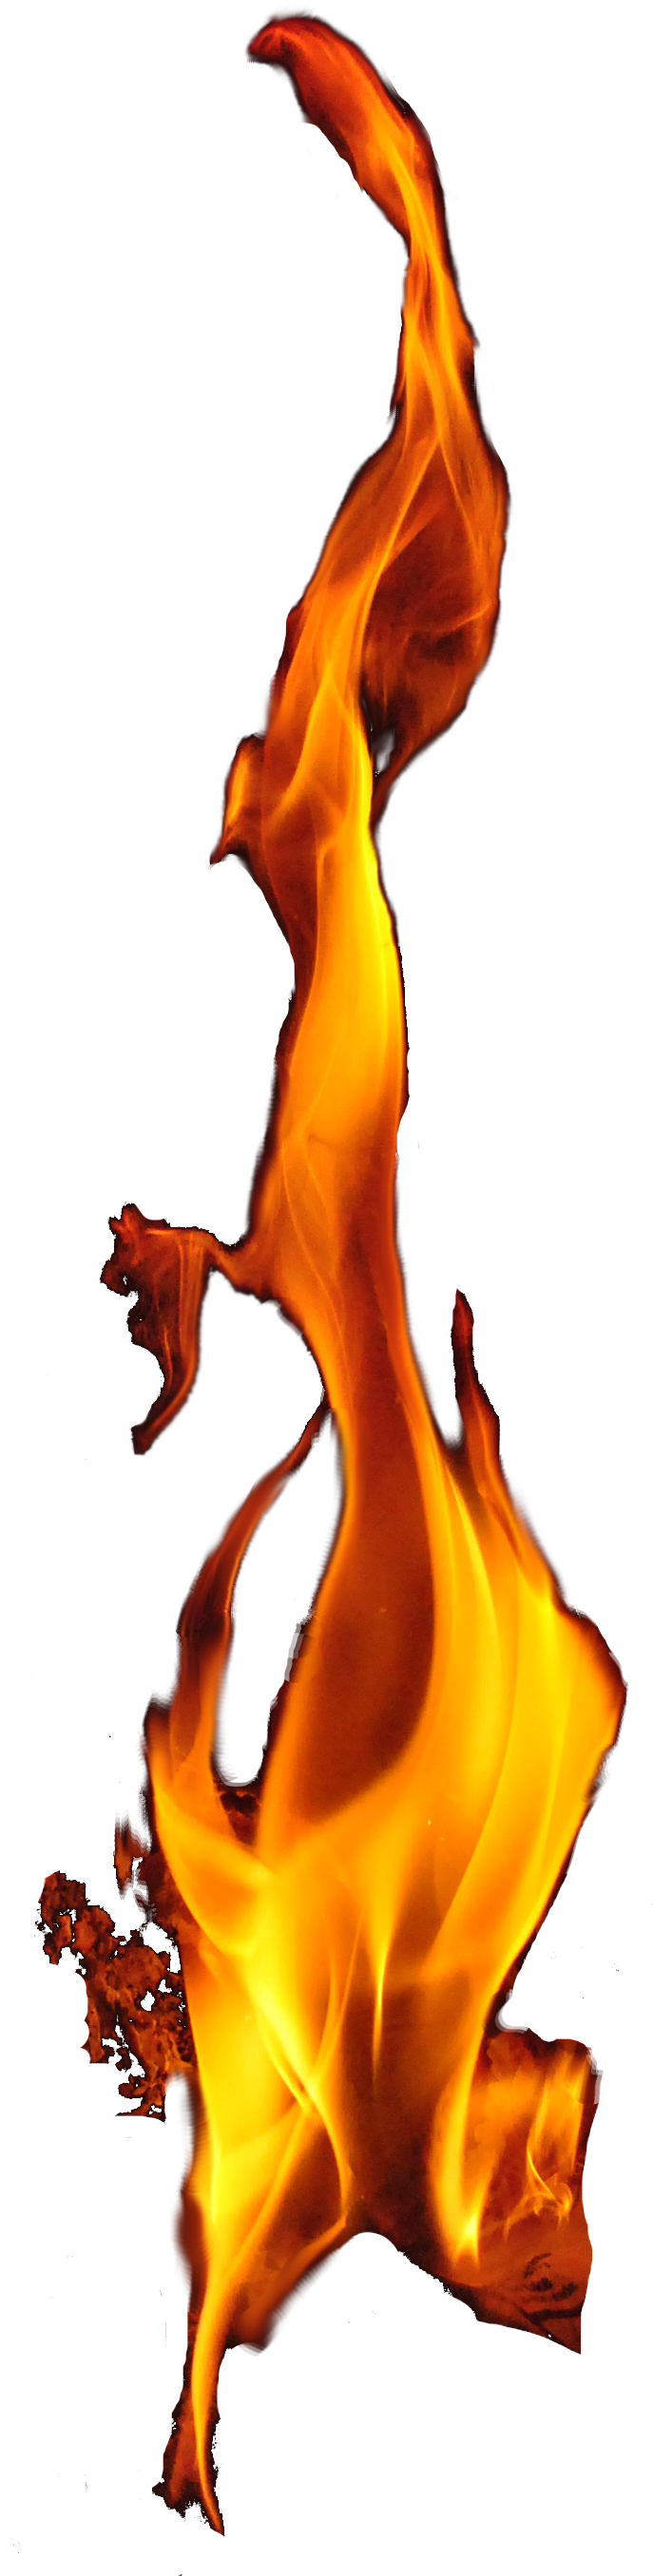 _images/Fire-image-from-wikipedia-Public-Domain-white-bg.png